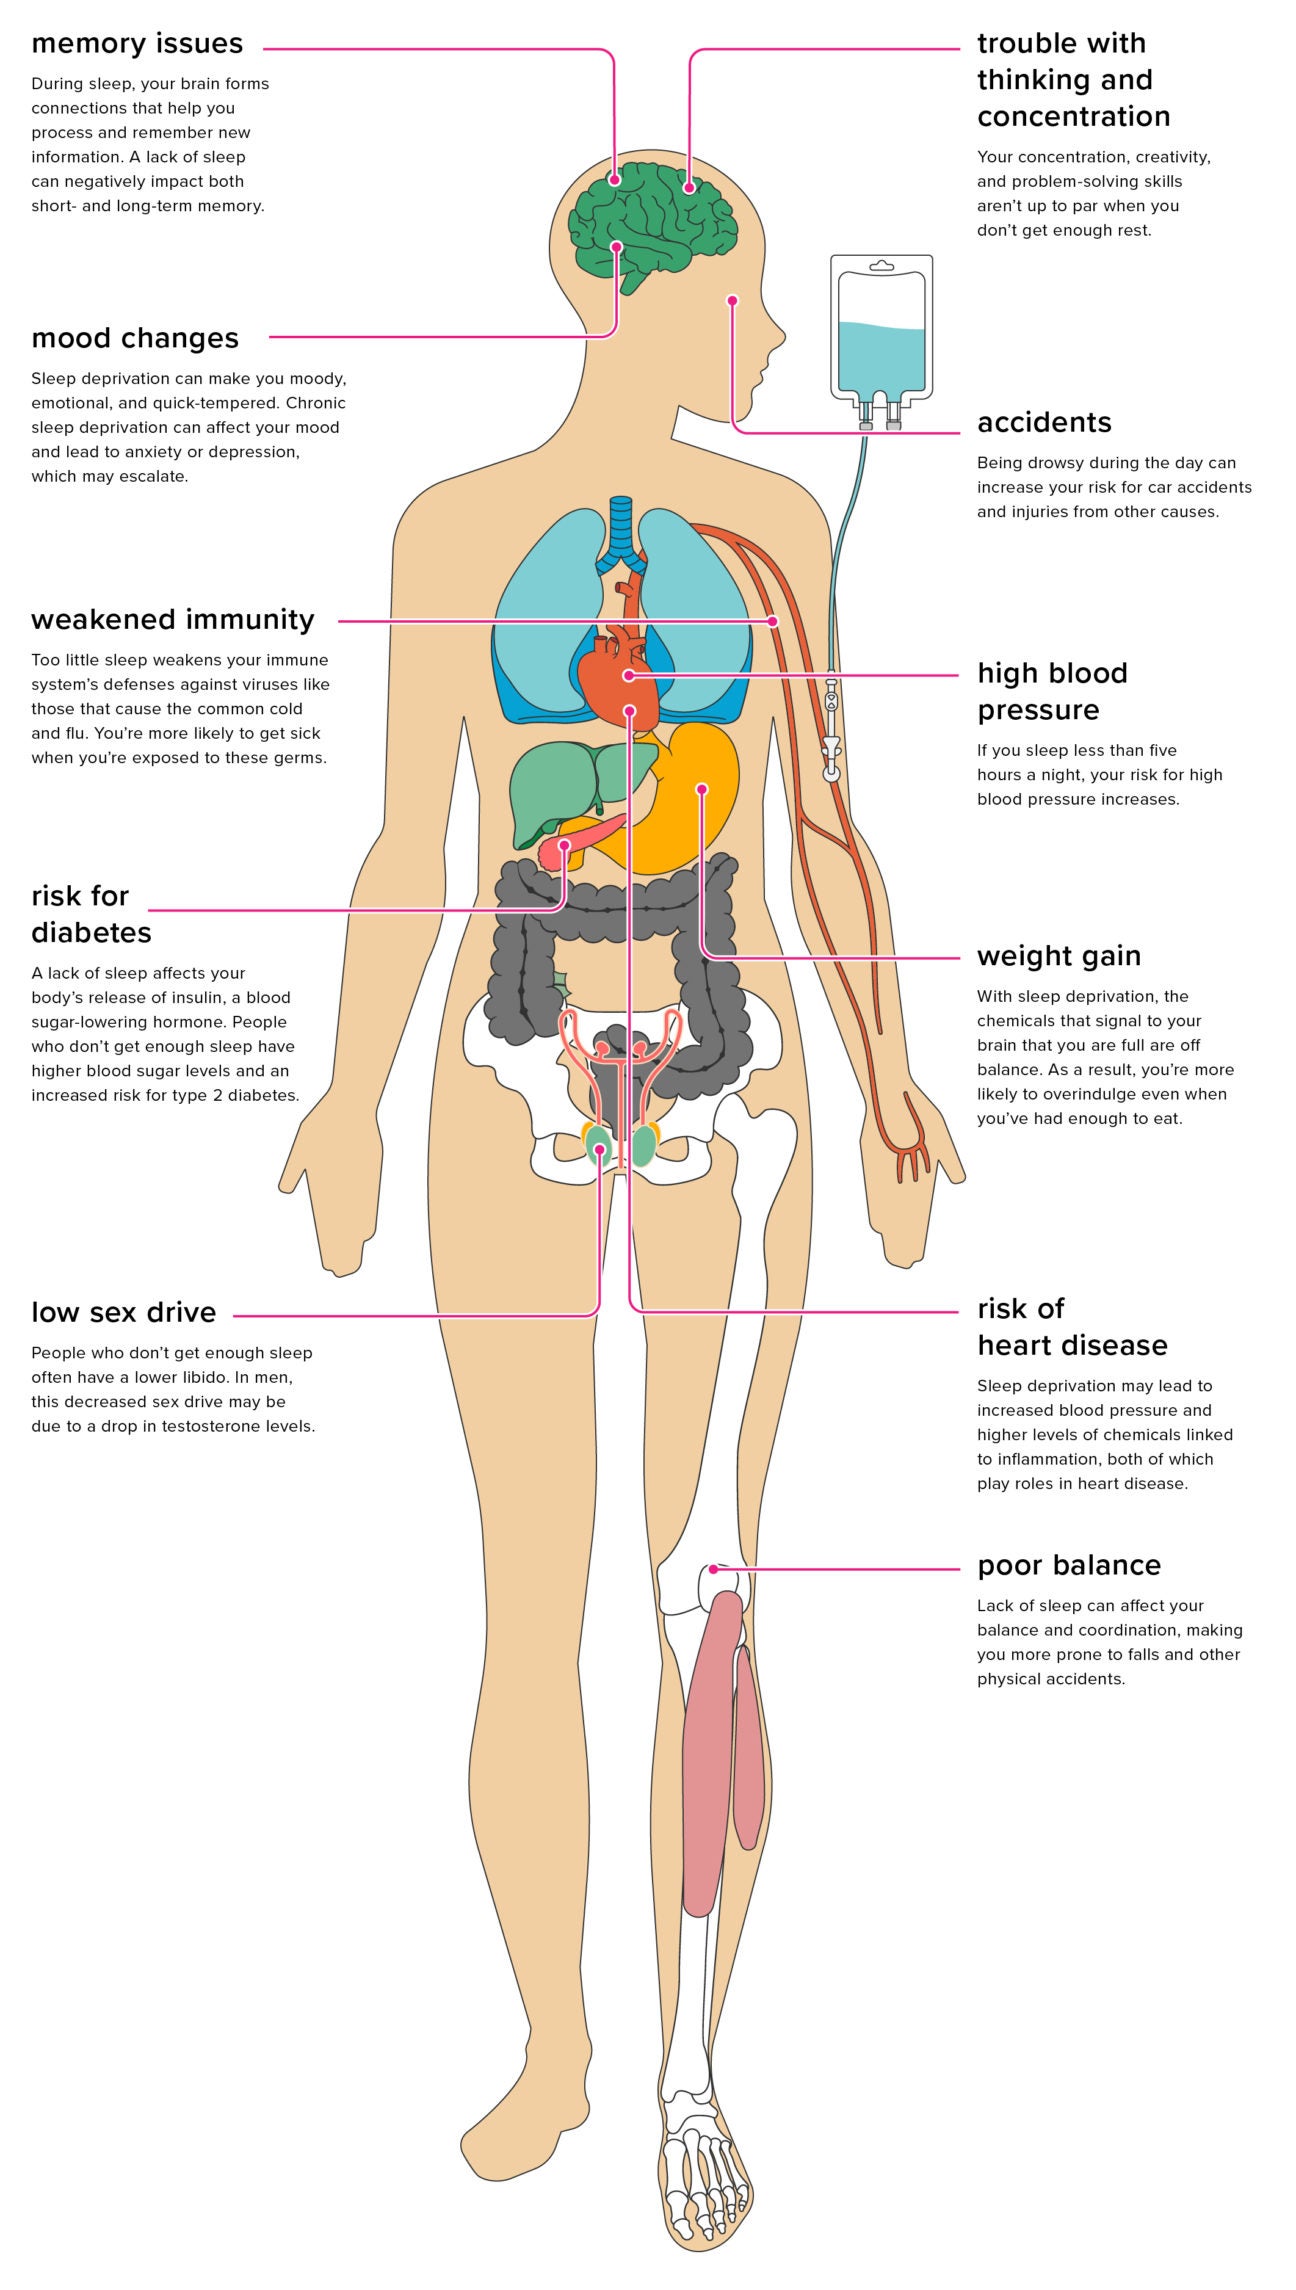 Car accident: What happens to the human body & the physiology behind it